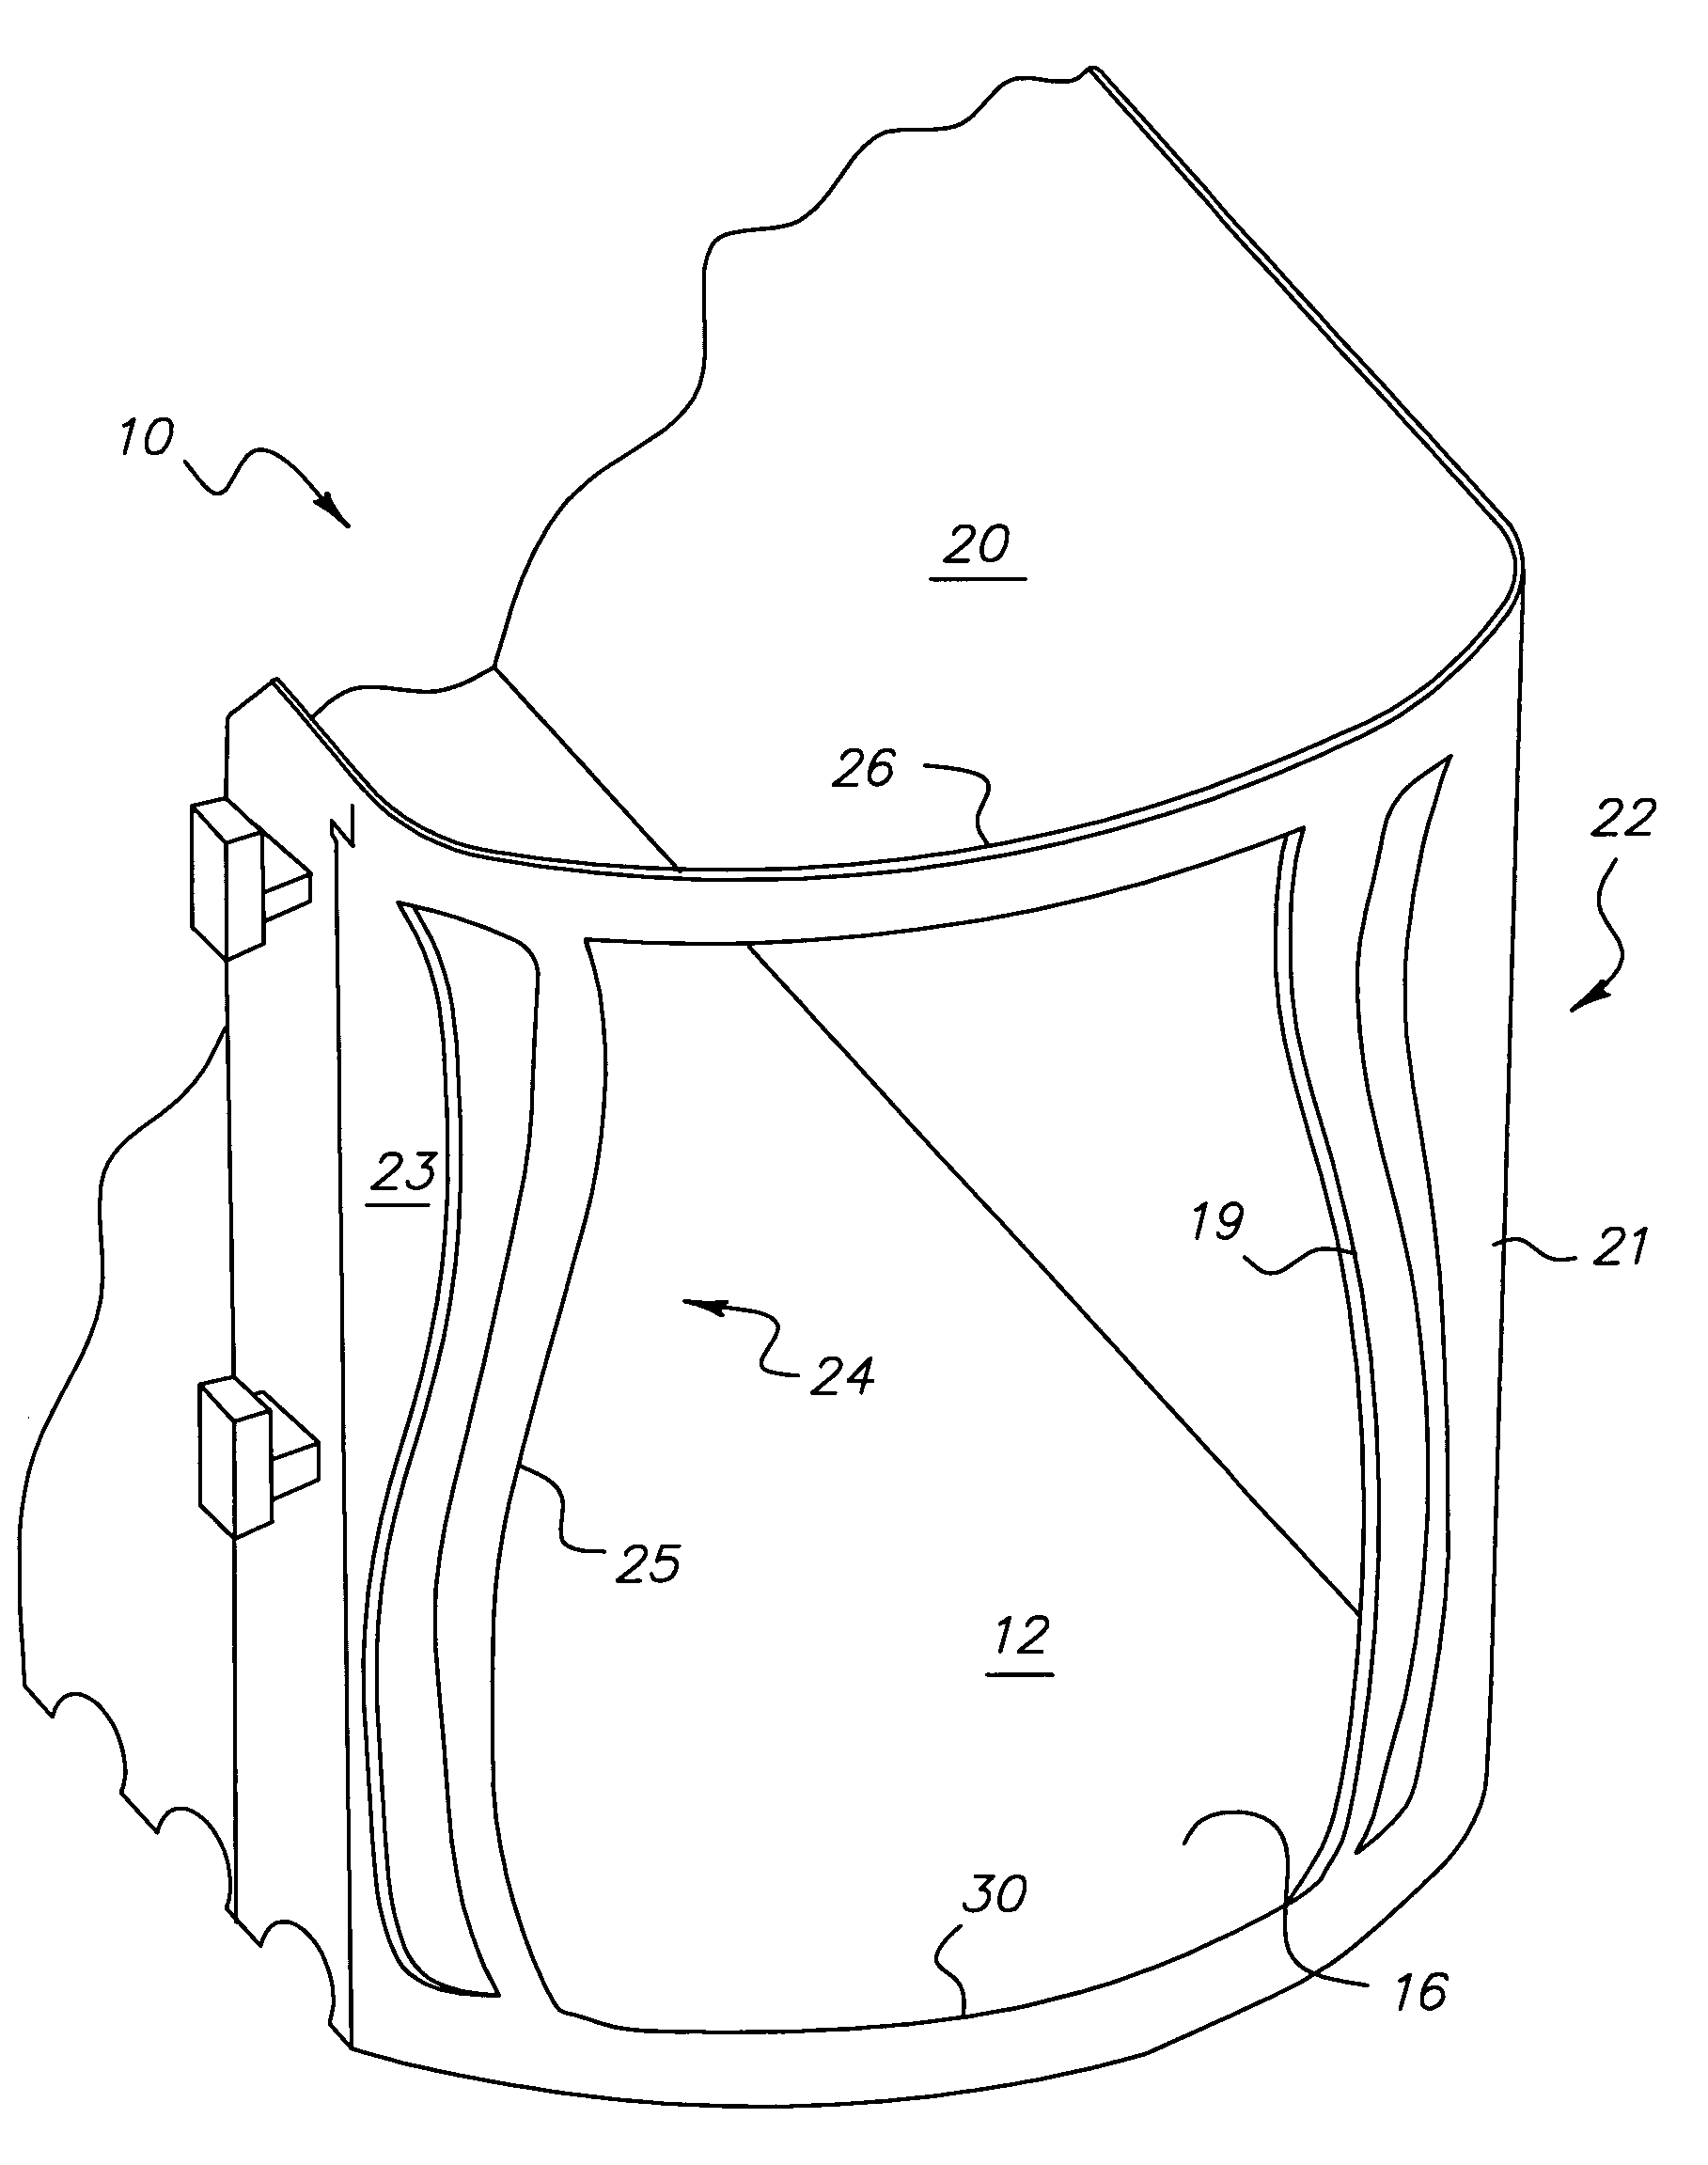 Display track device with anti-torsion bar